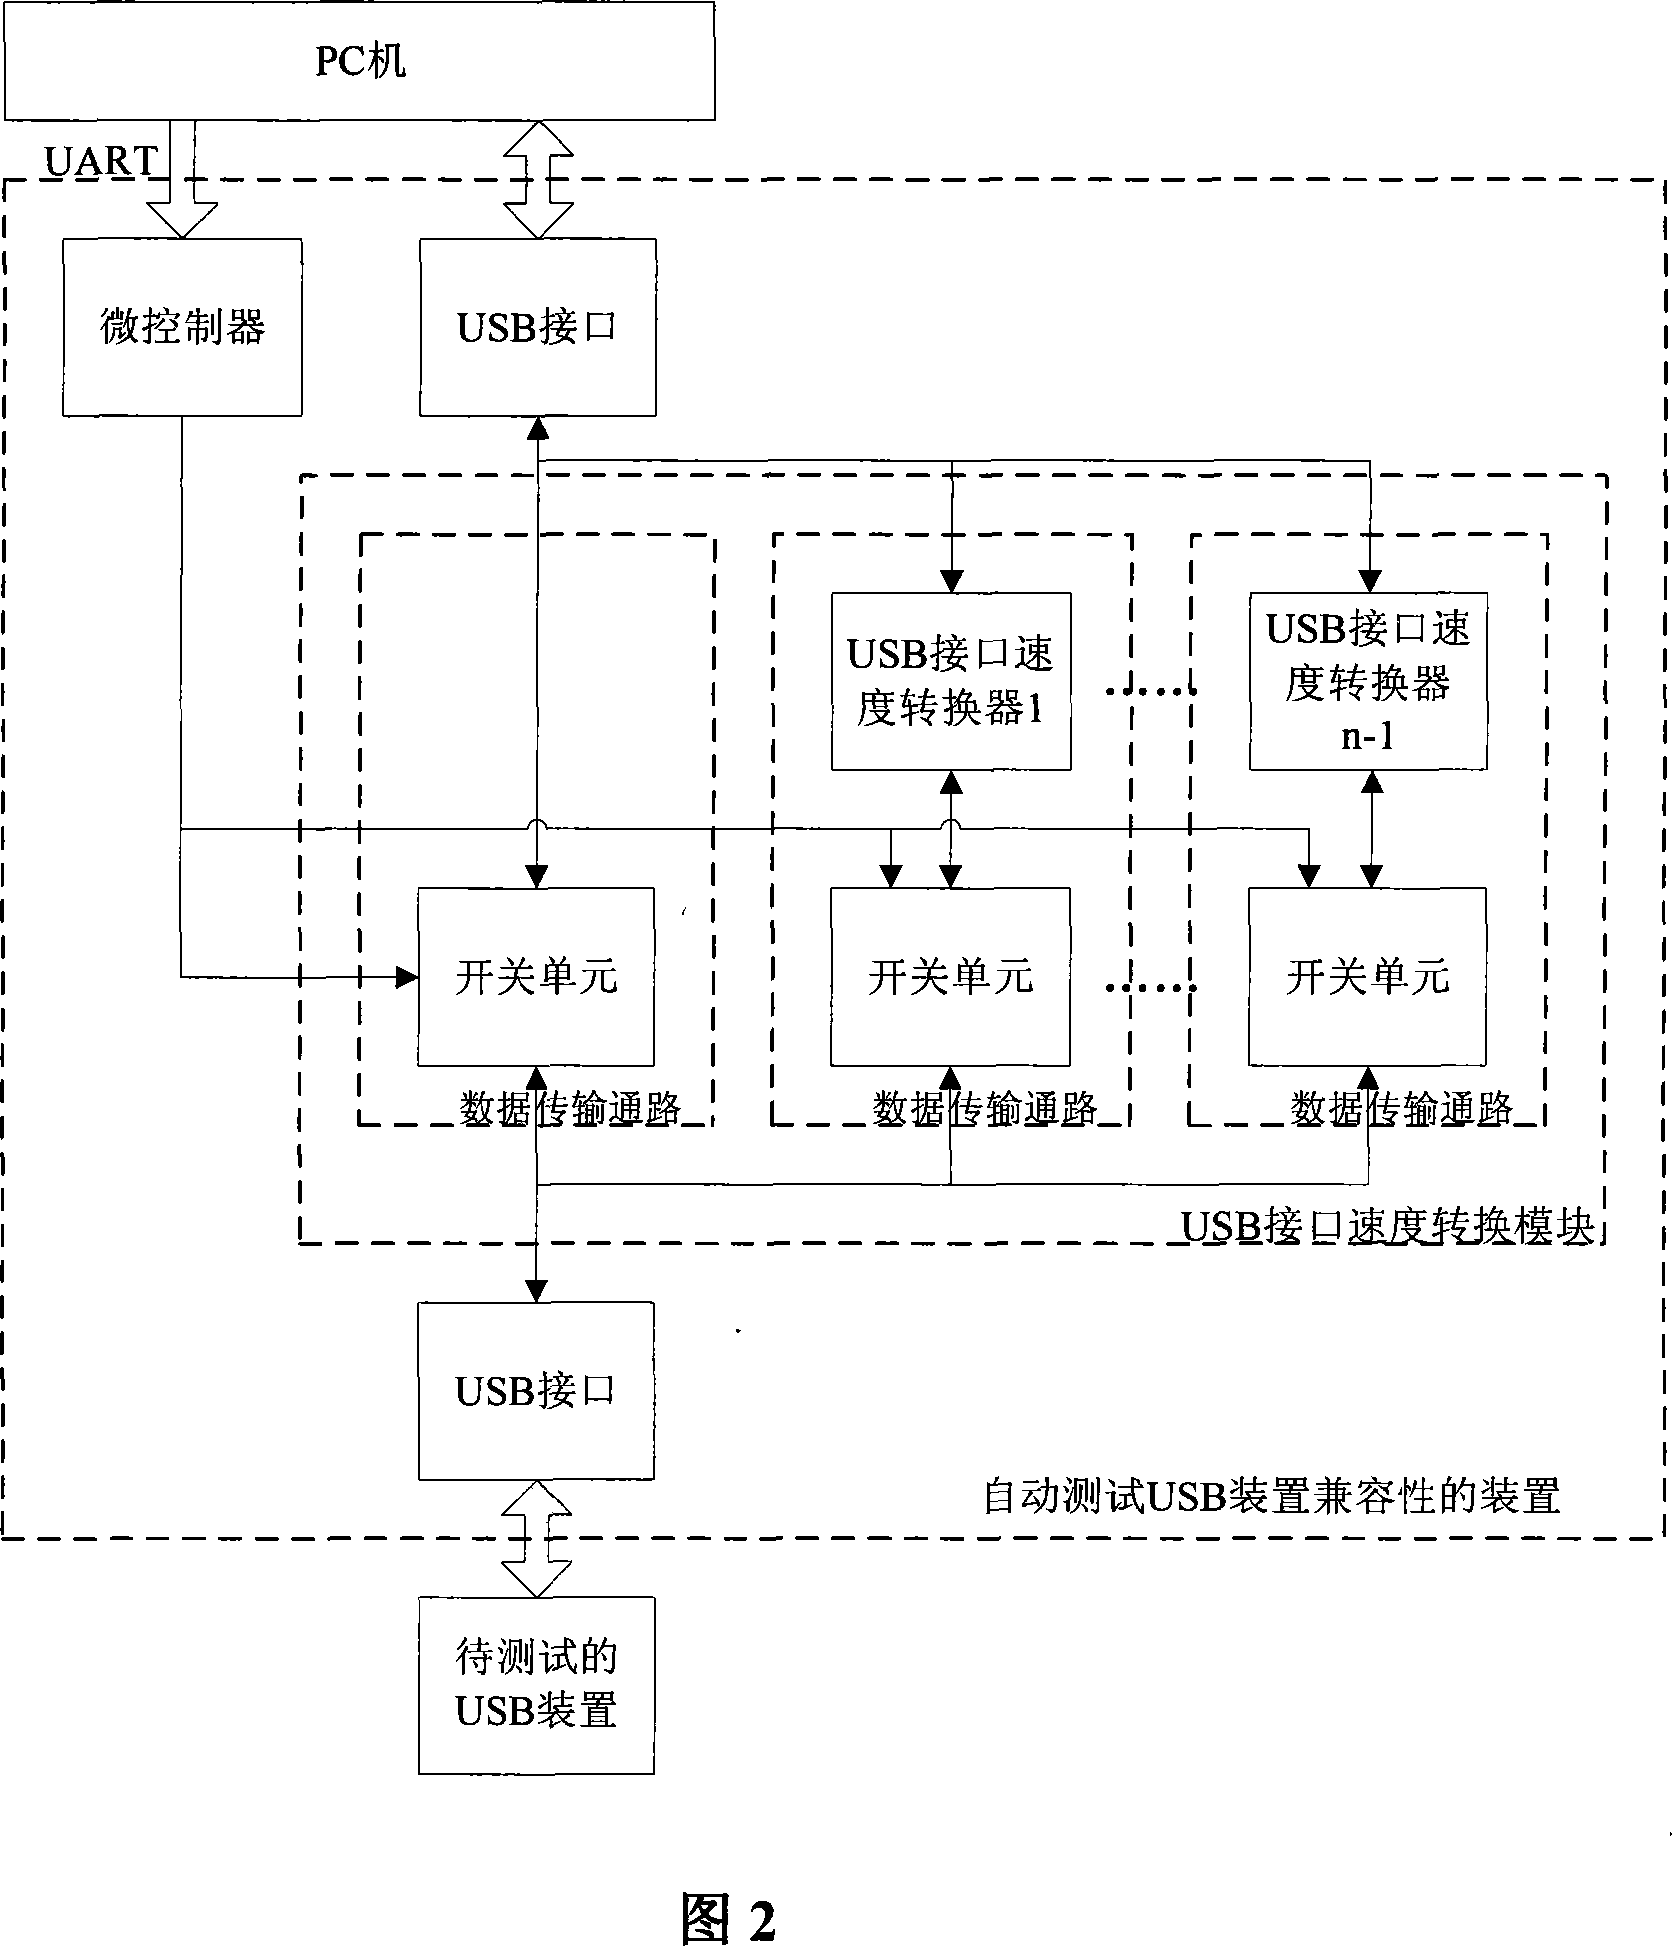 System for automatic testing USB compatibility